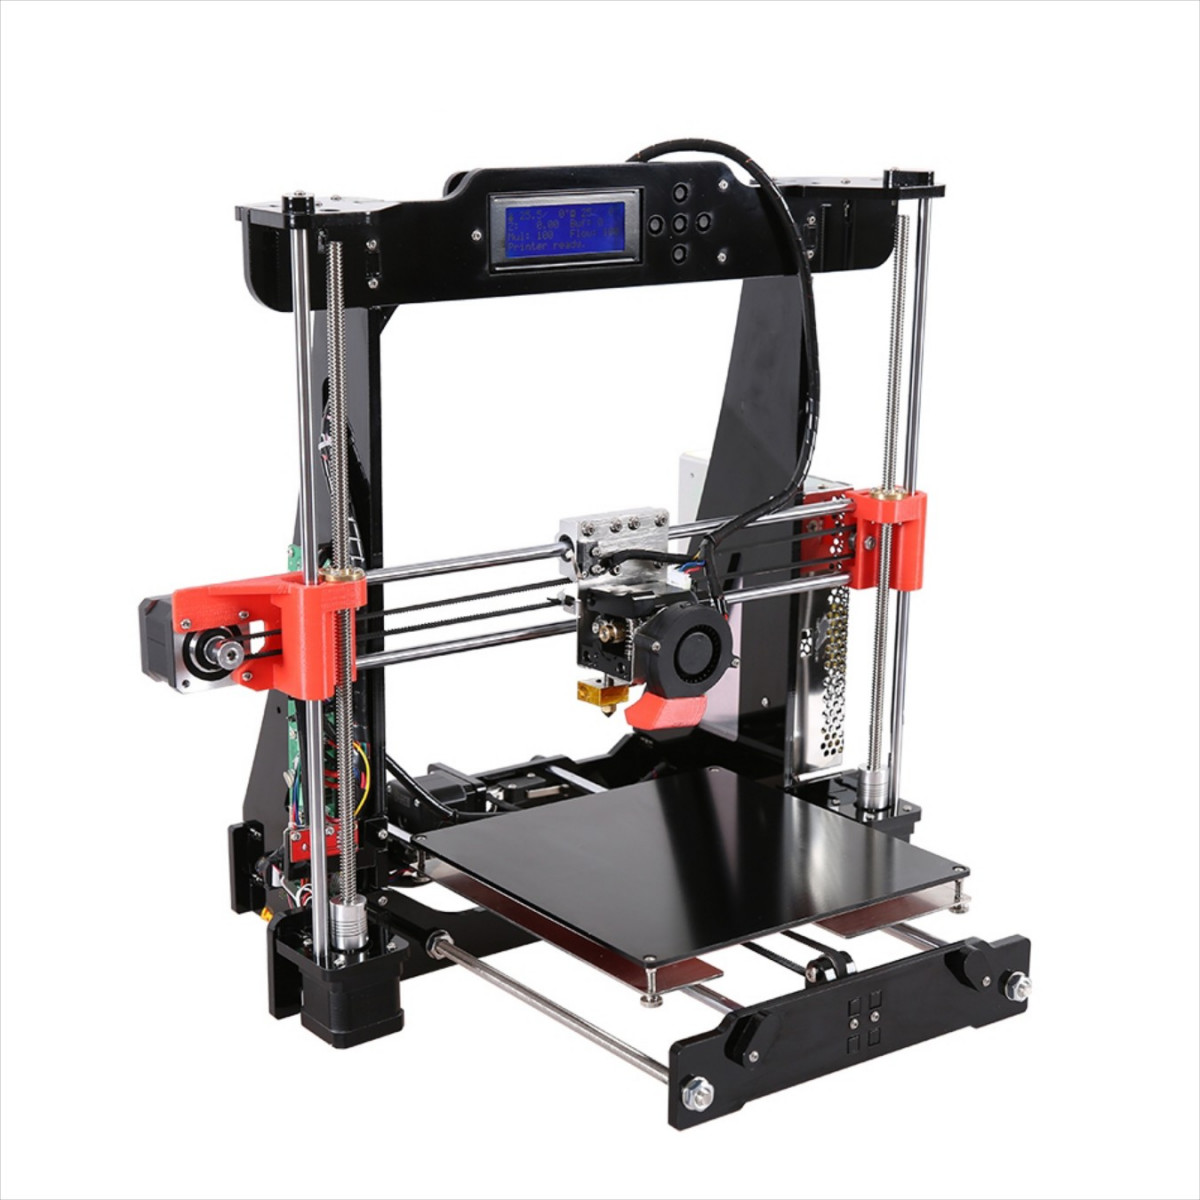 The Afinibot A3SU Single Extruder 3D Printer Kit needs to be assembled. 